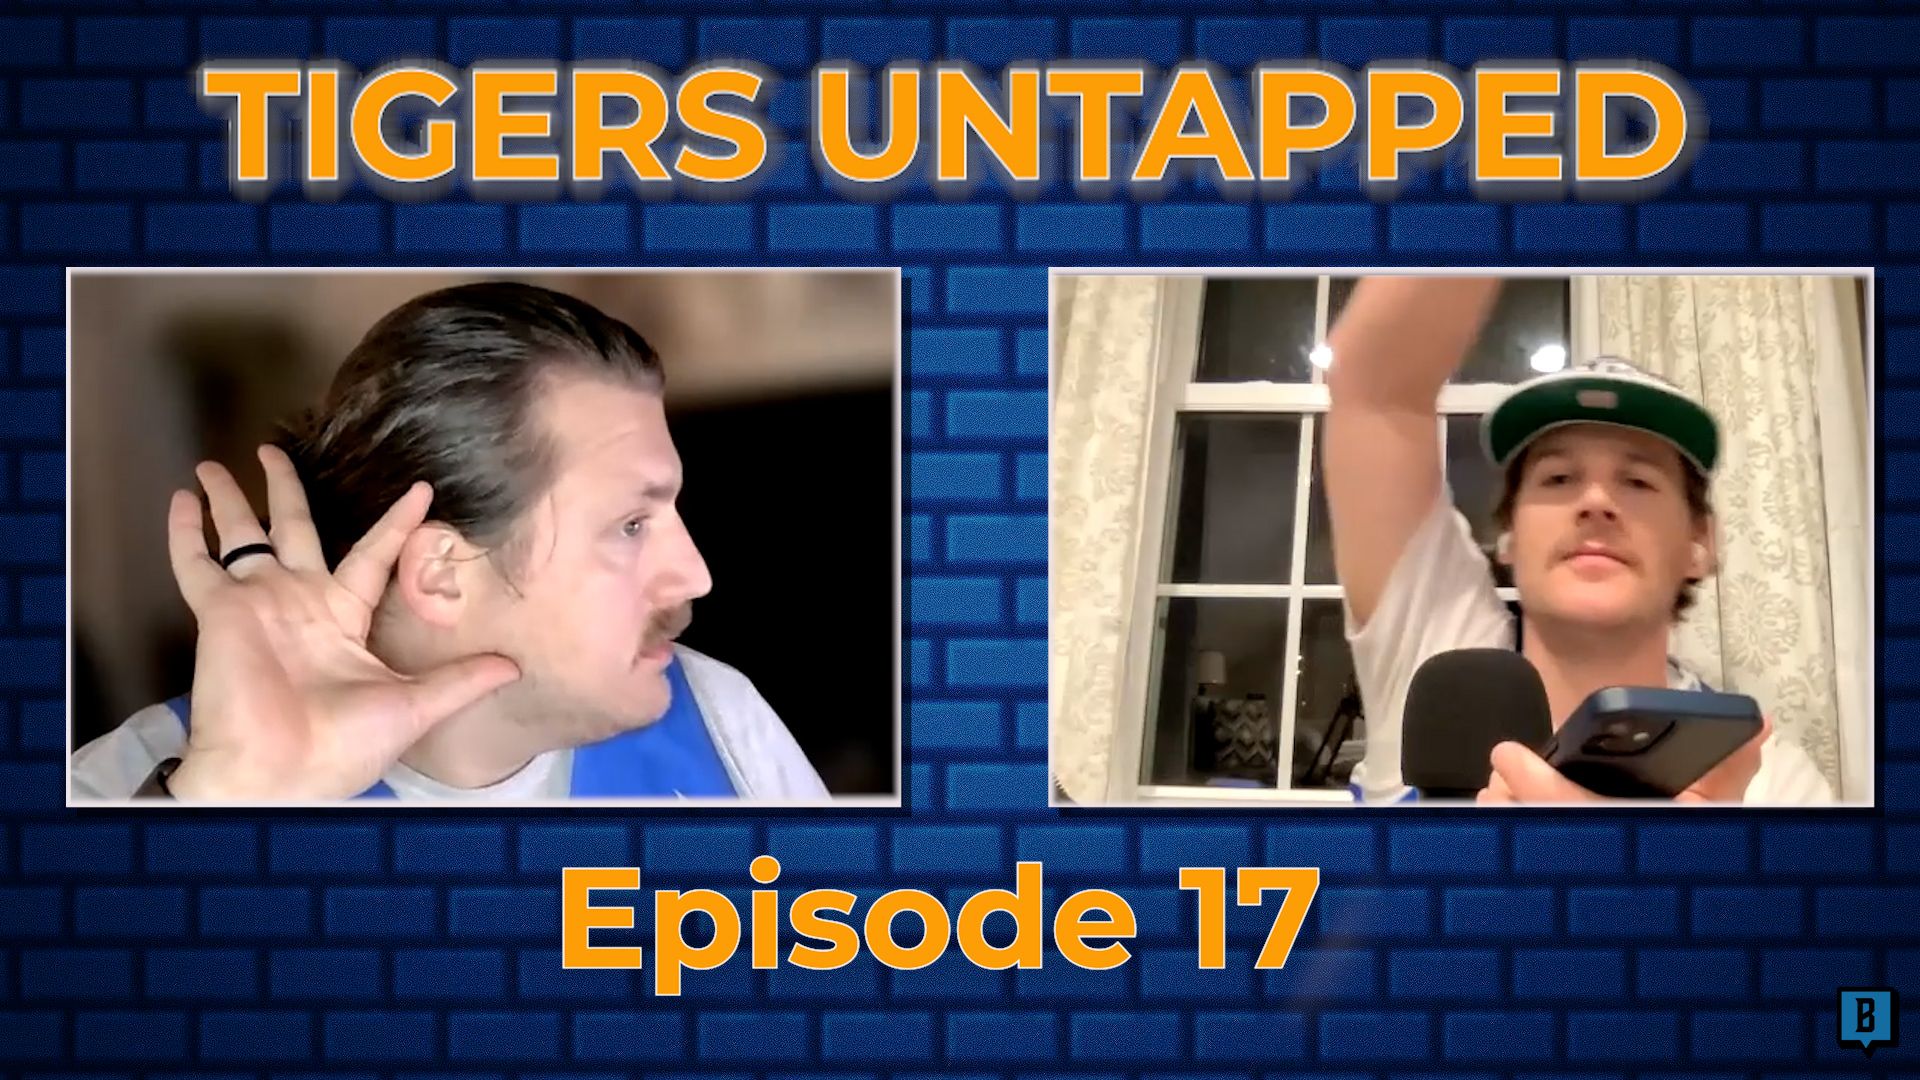 Featured image for “Tigers Untapped Episode 17: Penny Hardaway and the Memphis Tigers are going dancing”